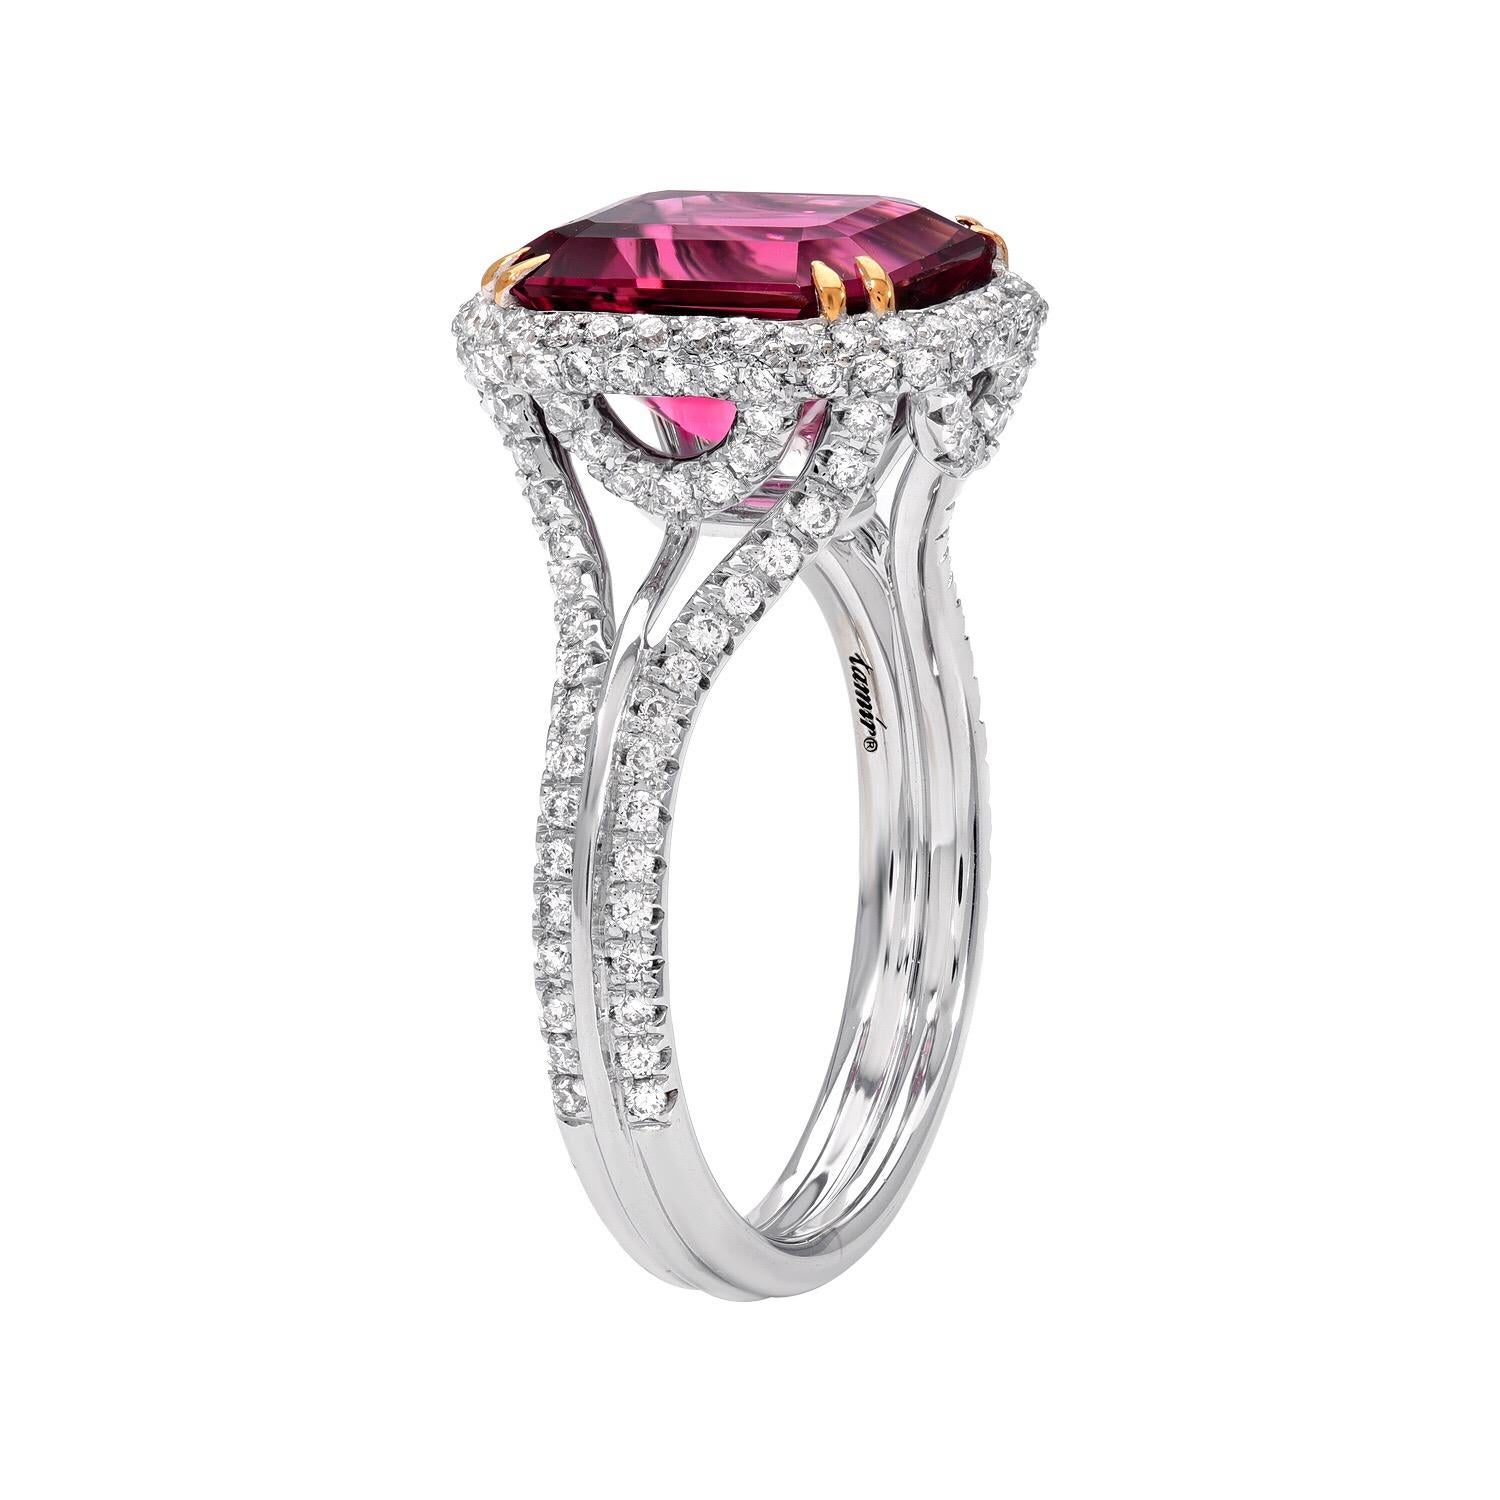 3.48 carat emerald cut reddish Pink Tourmaline (also known as Rubellite), is hand set in this fantastic 18K white gold ring, secured by 18K yellow gold prongs, and adorned by a total of 0.63 carat round brilliant diamonds.
Ring size 6.5. Re-sizing